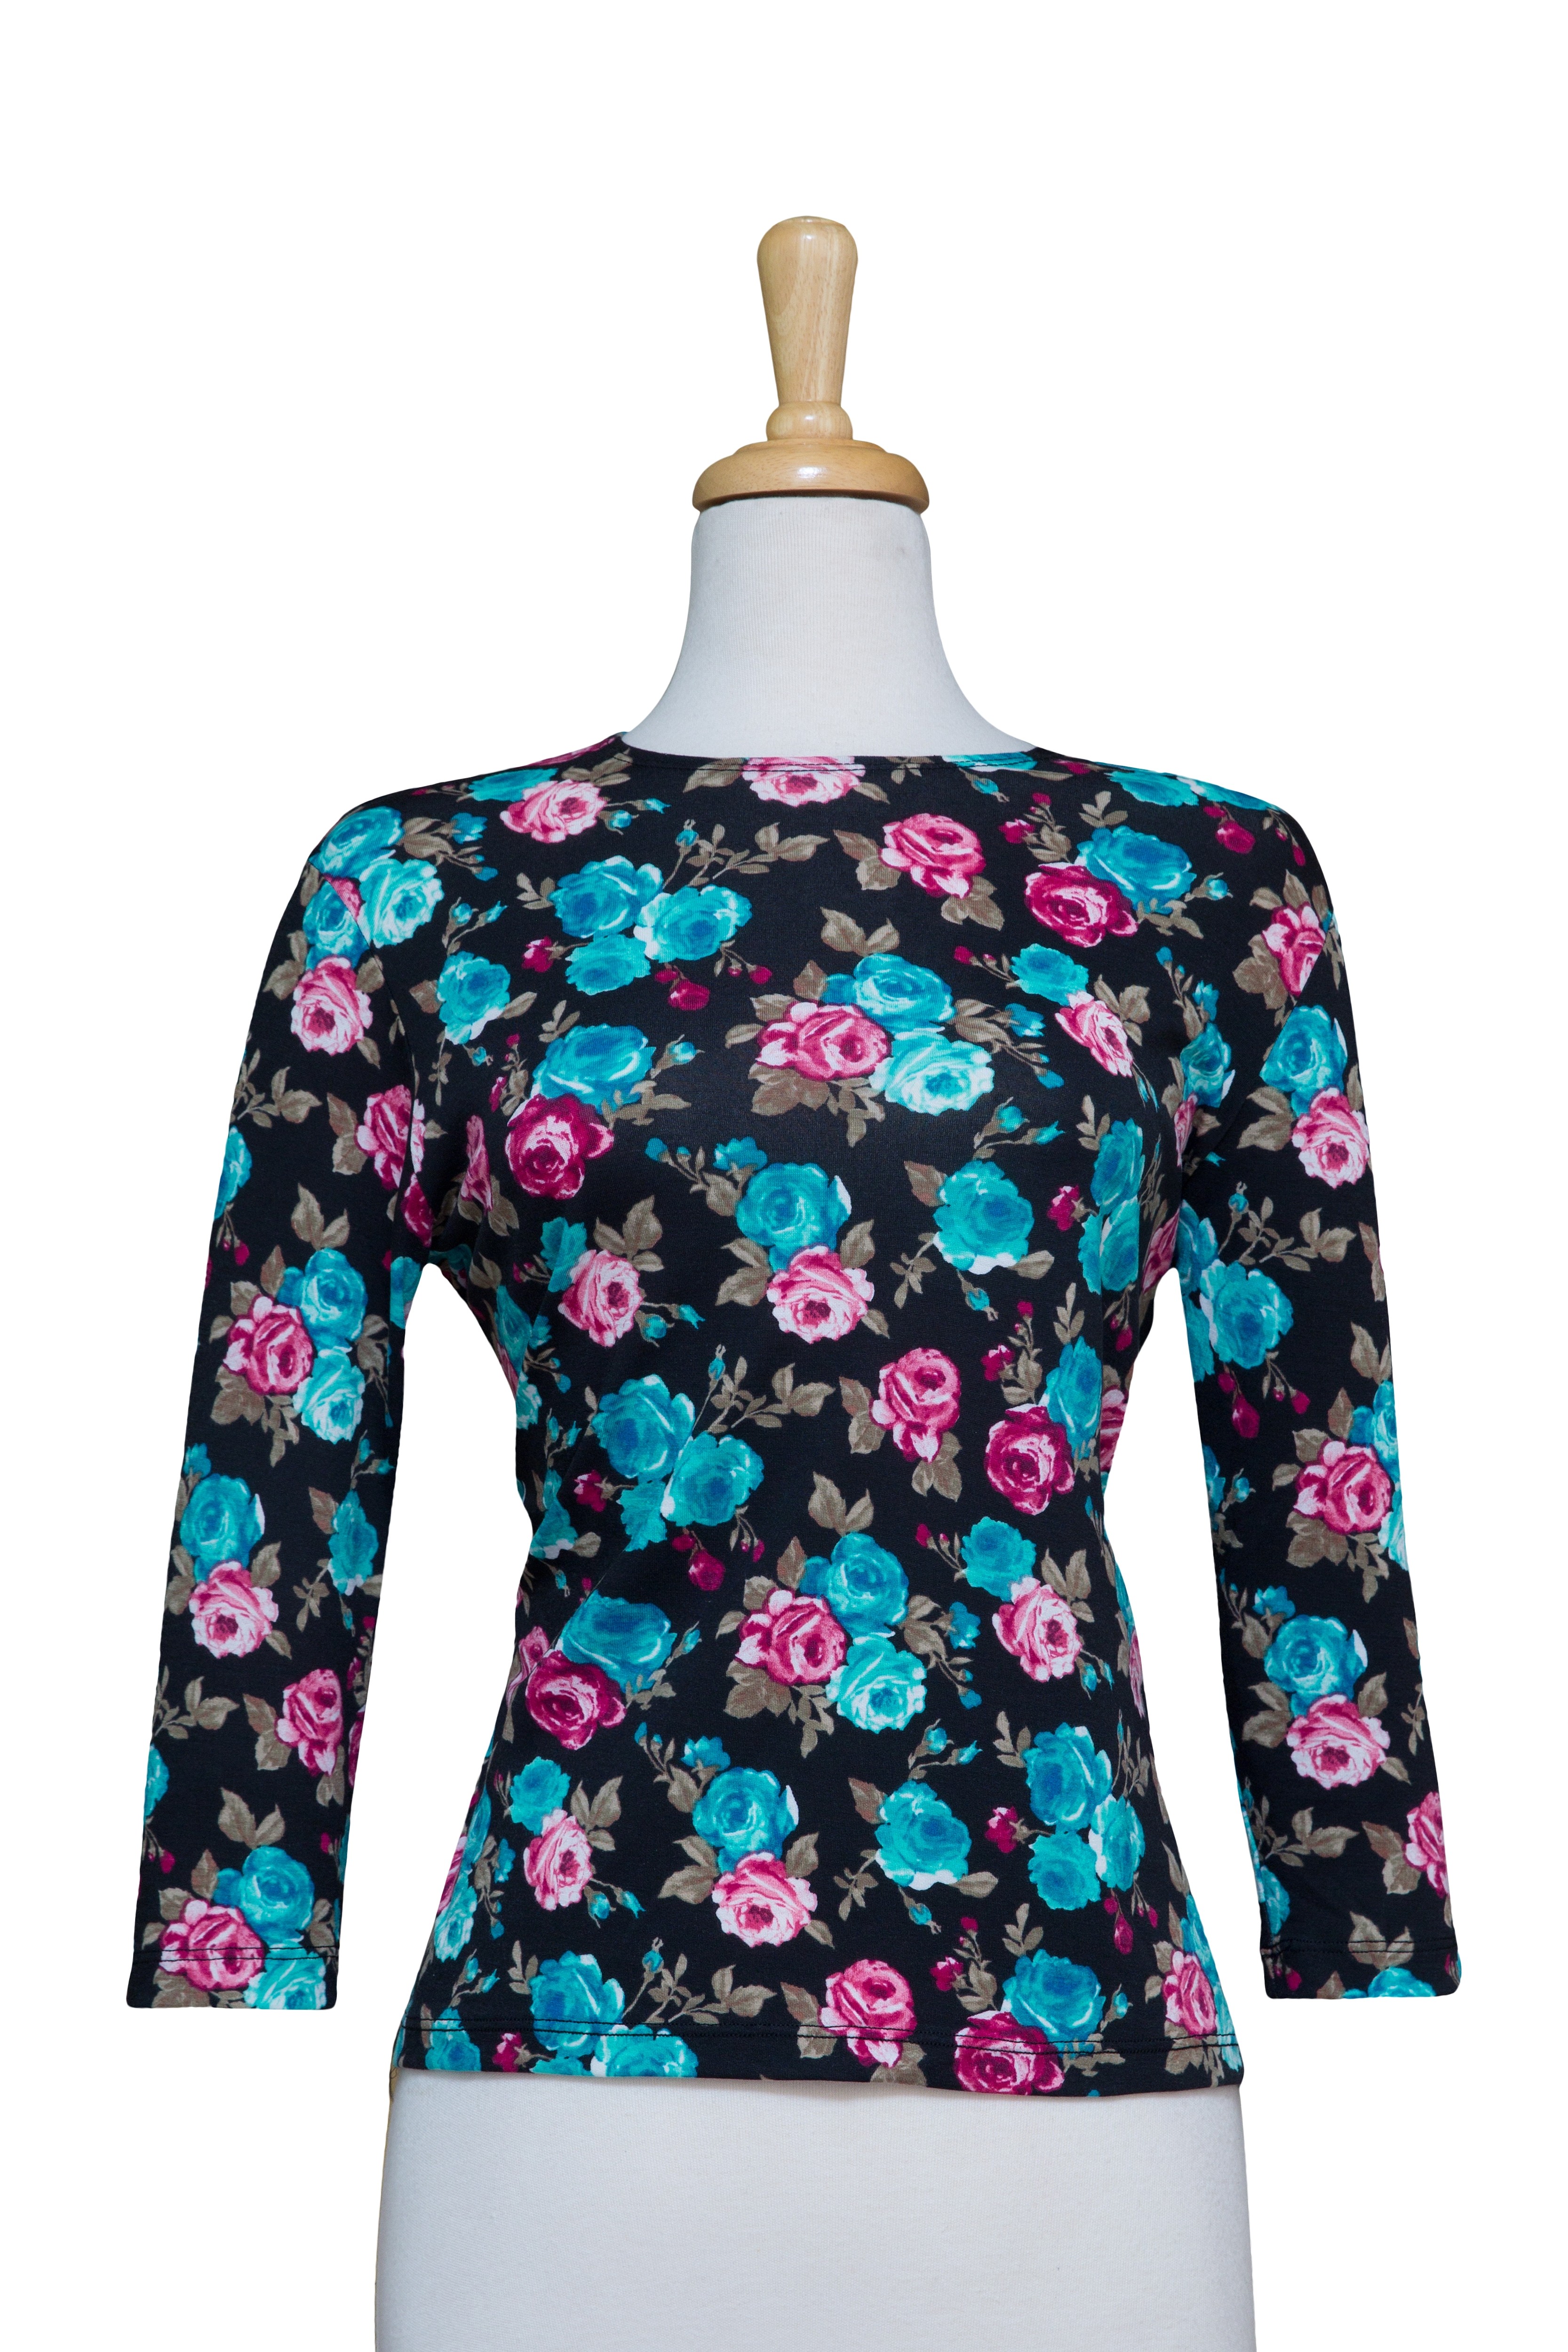 Black, Teal, and Pink Roses 3/4 Sleeve  Cotton Top 